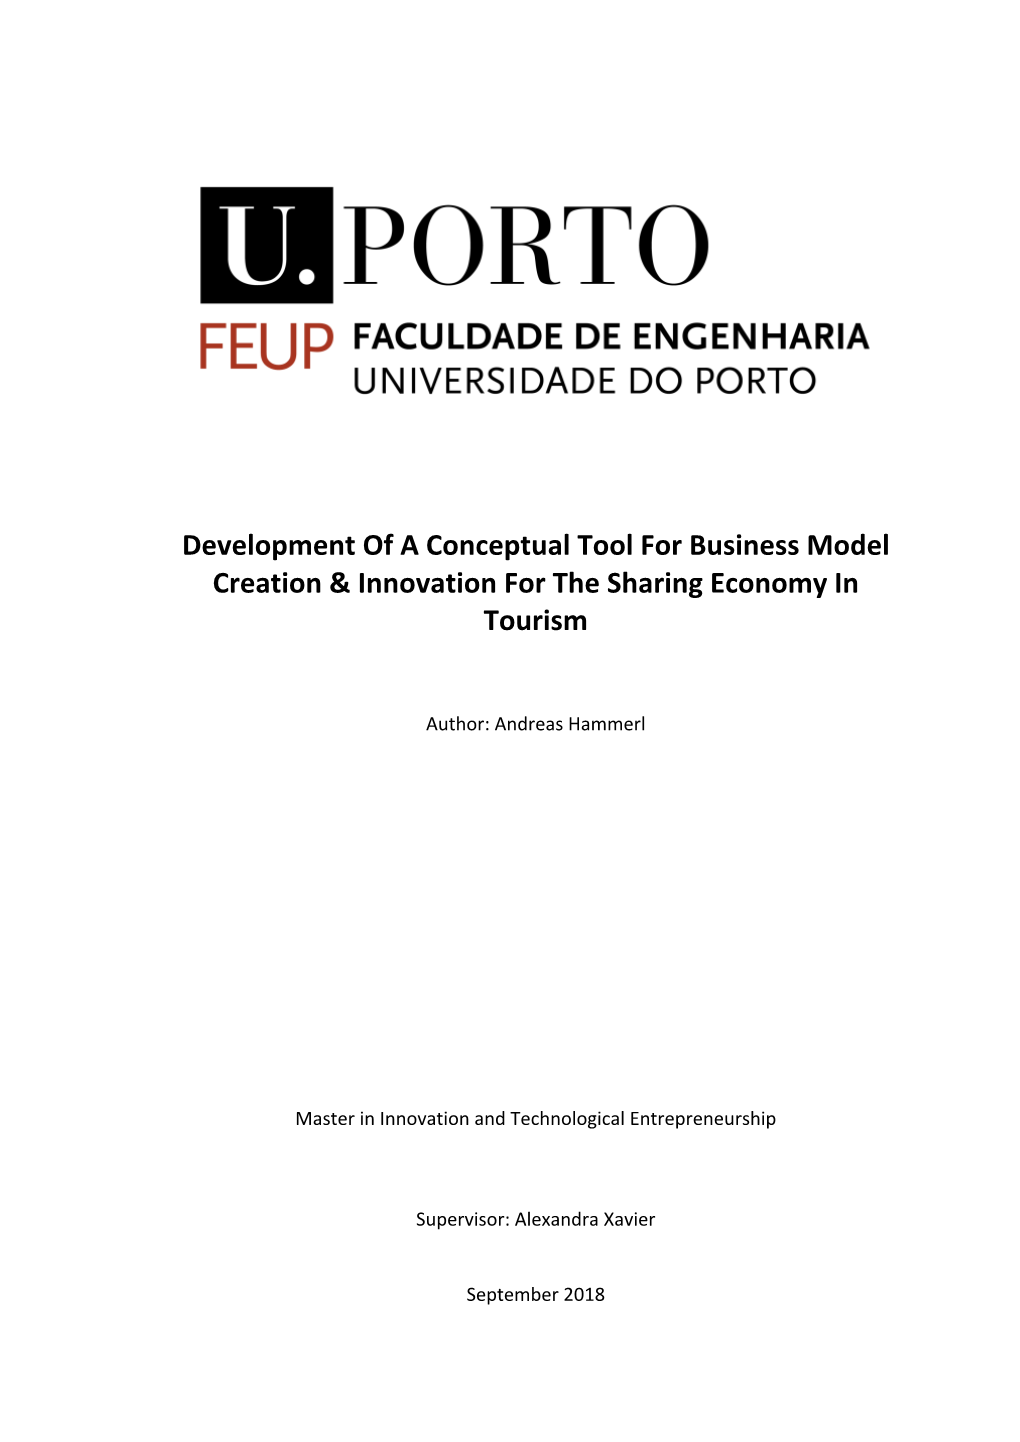 Development of a Conceptual Tool for Business Model Creation & Innovation for the Sharing Economy in Tourism